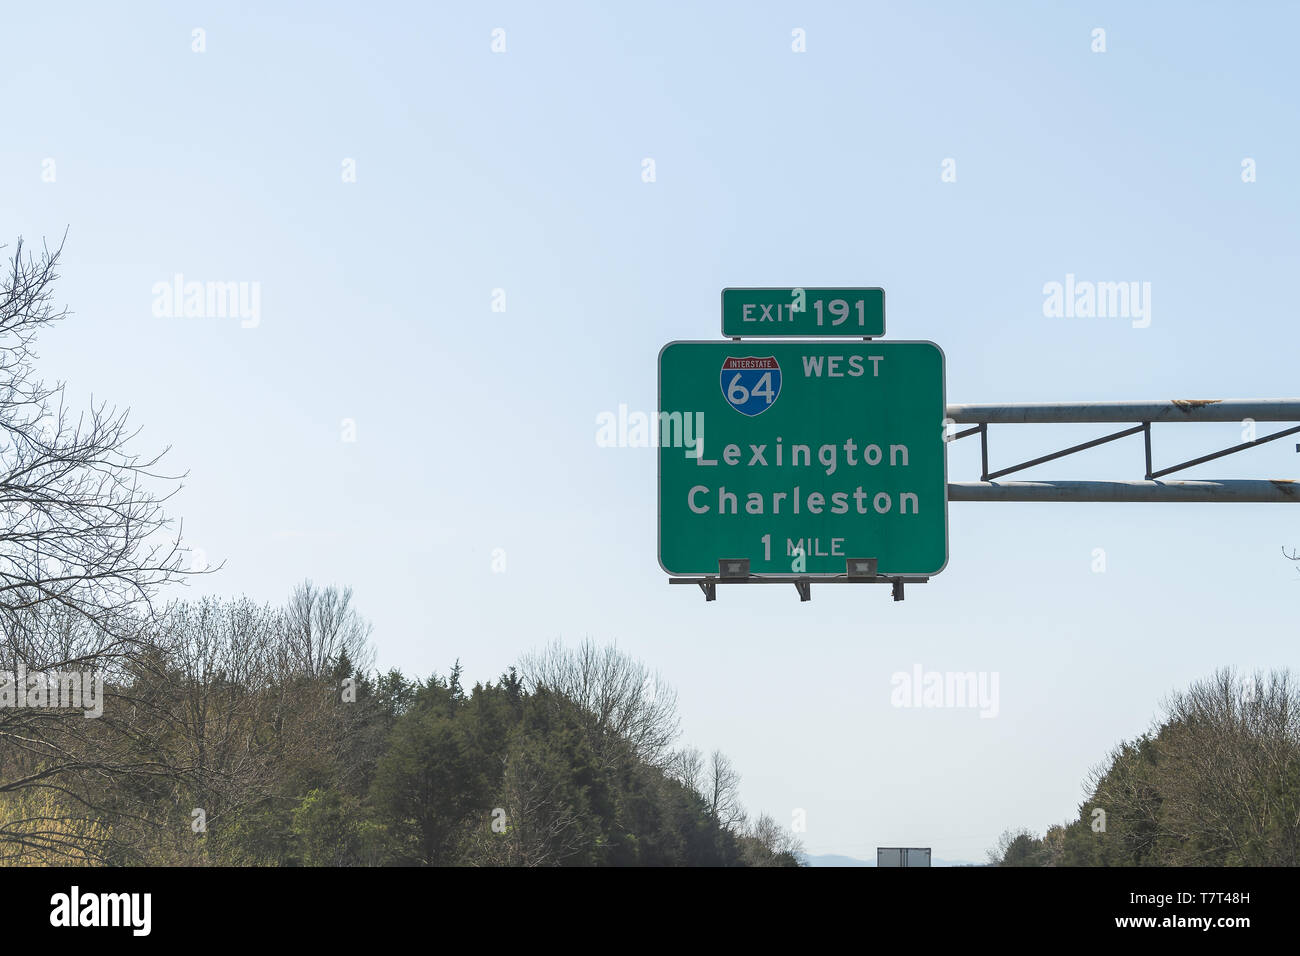 Road sign above highway road of Interstate 64 West with direction to exit 191 in 1 mile to Lexington and Charleston in Virginia Stock Photo